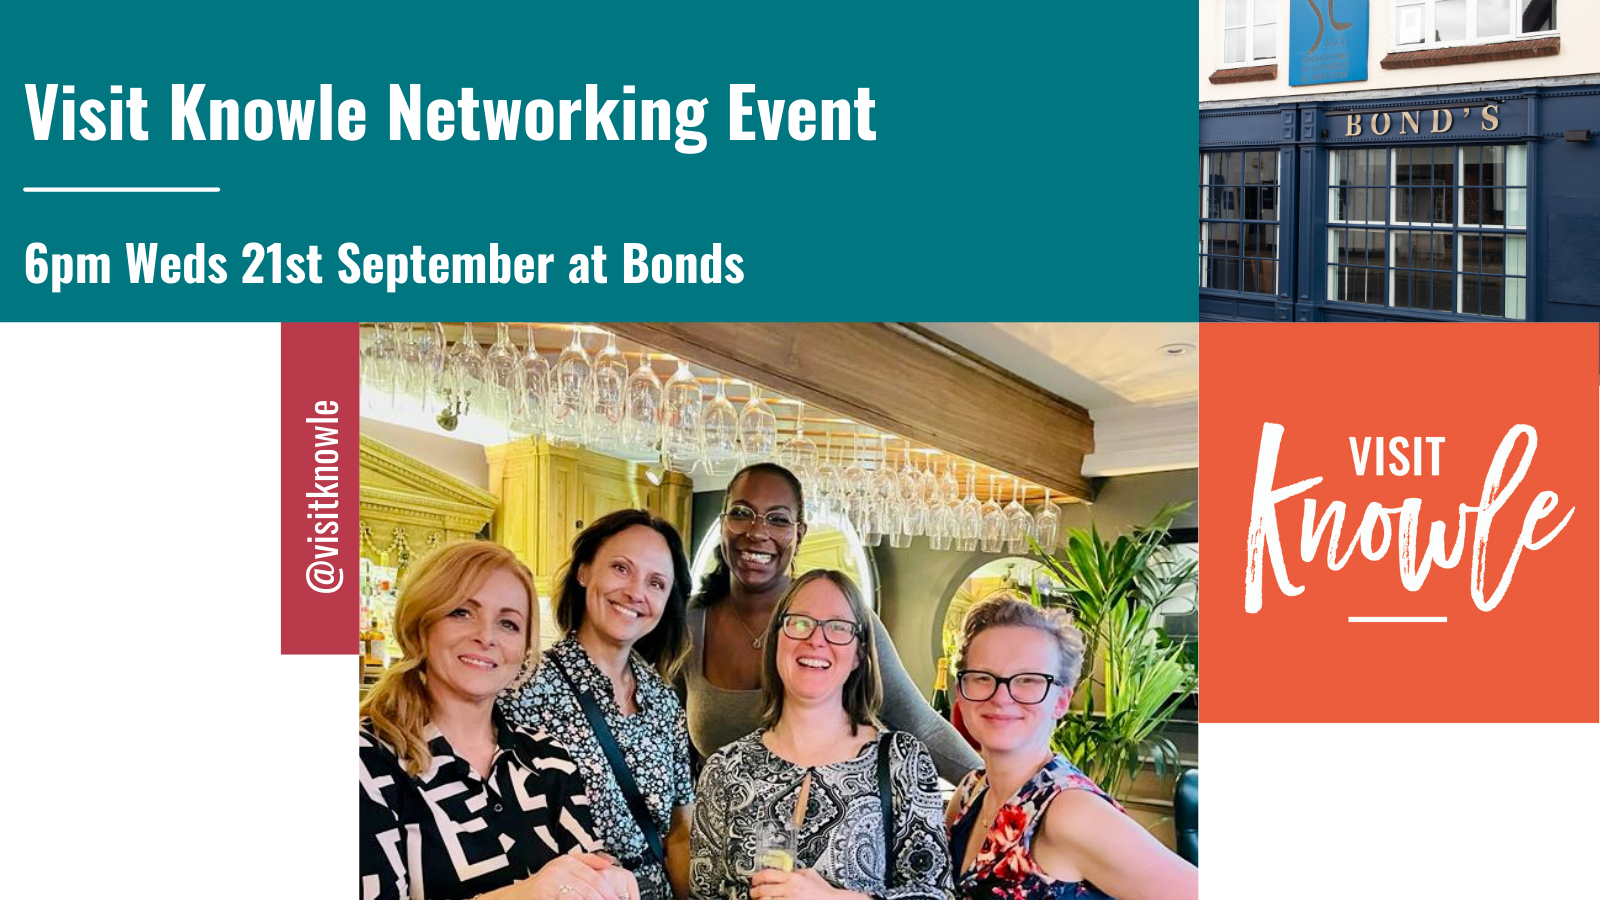 Visit Knowle networking